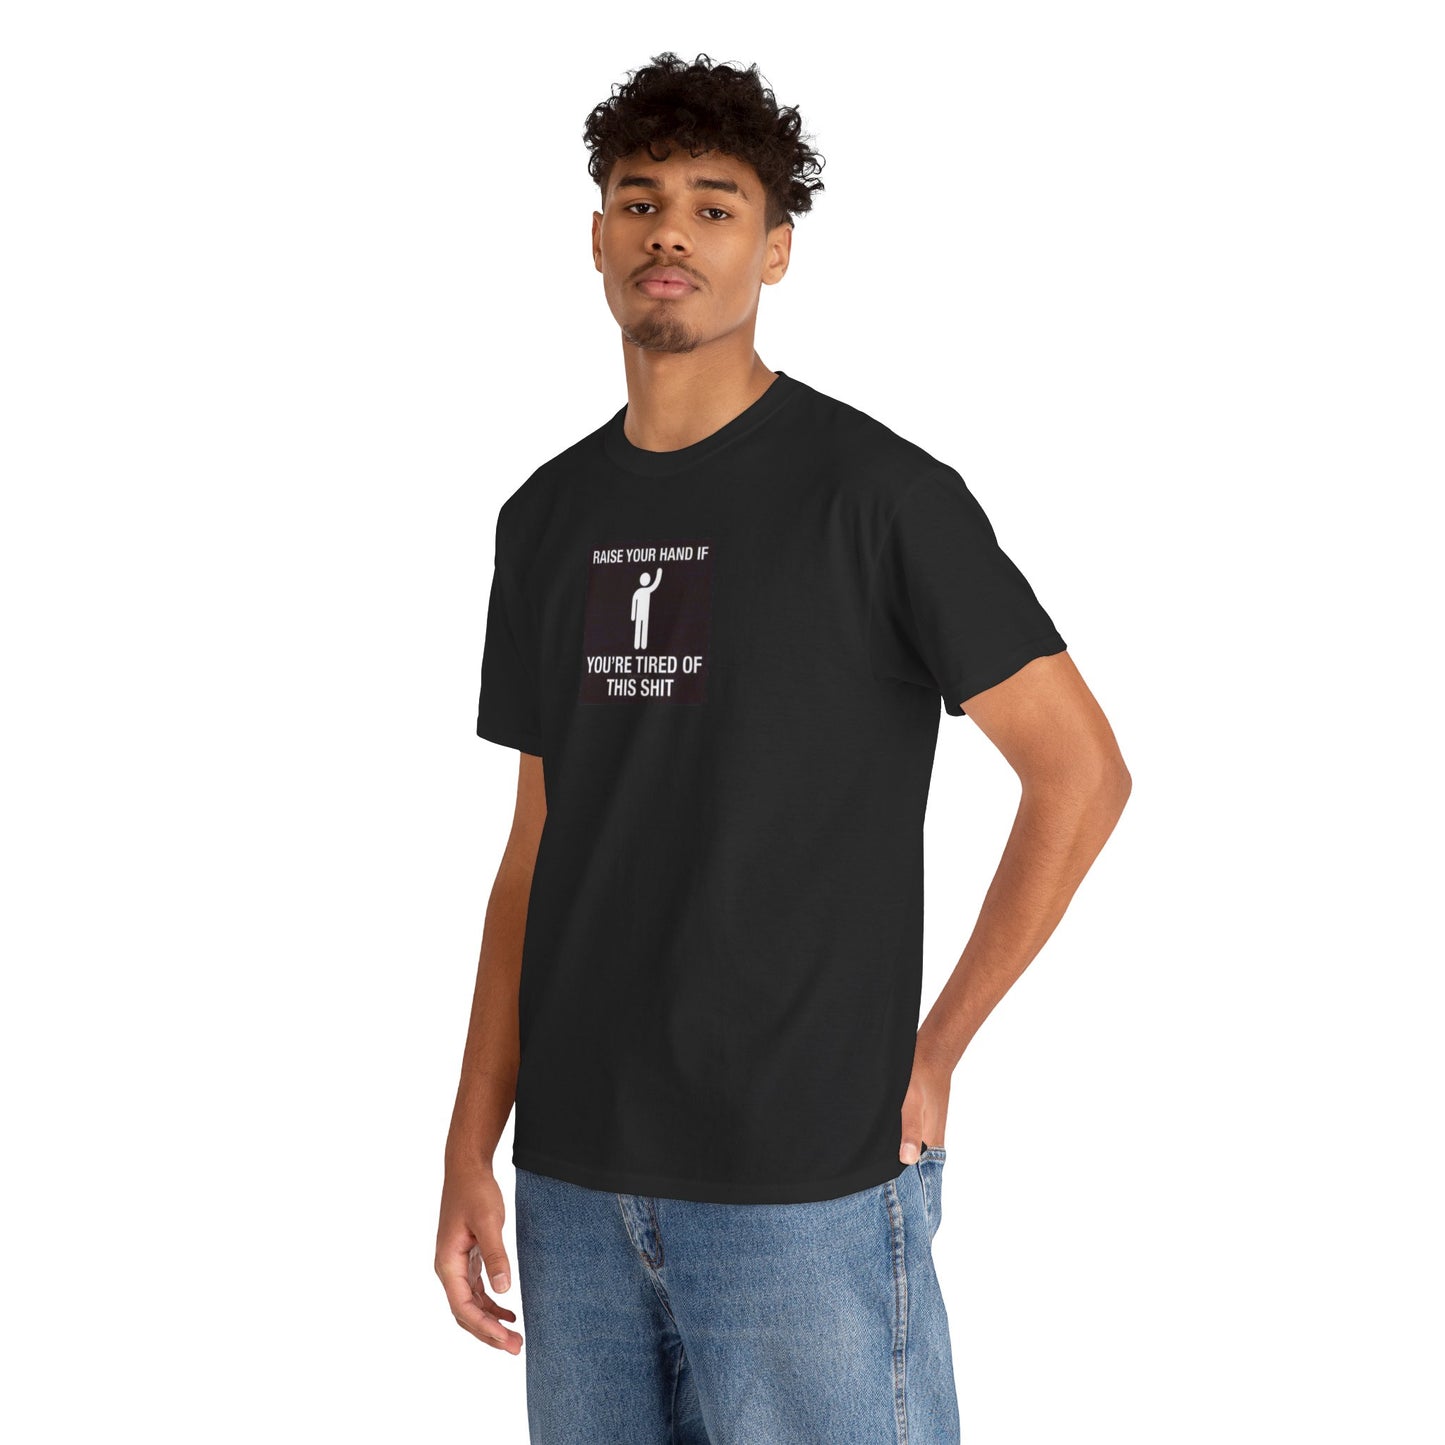 Raise Your Hand if You're Tired of This Shit T-Shirt